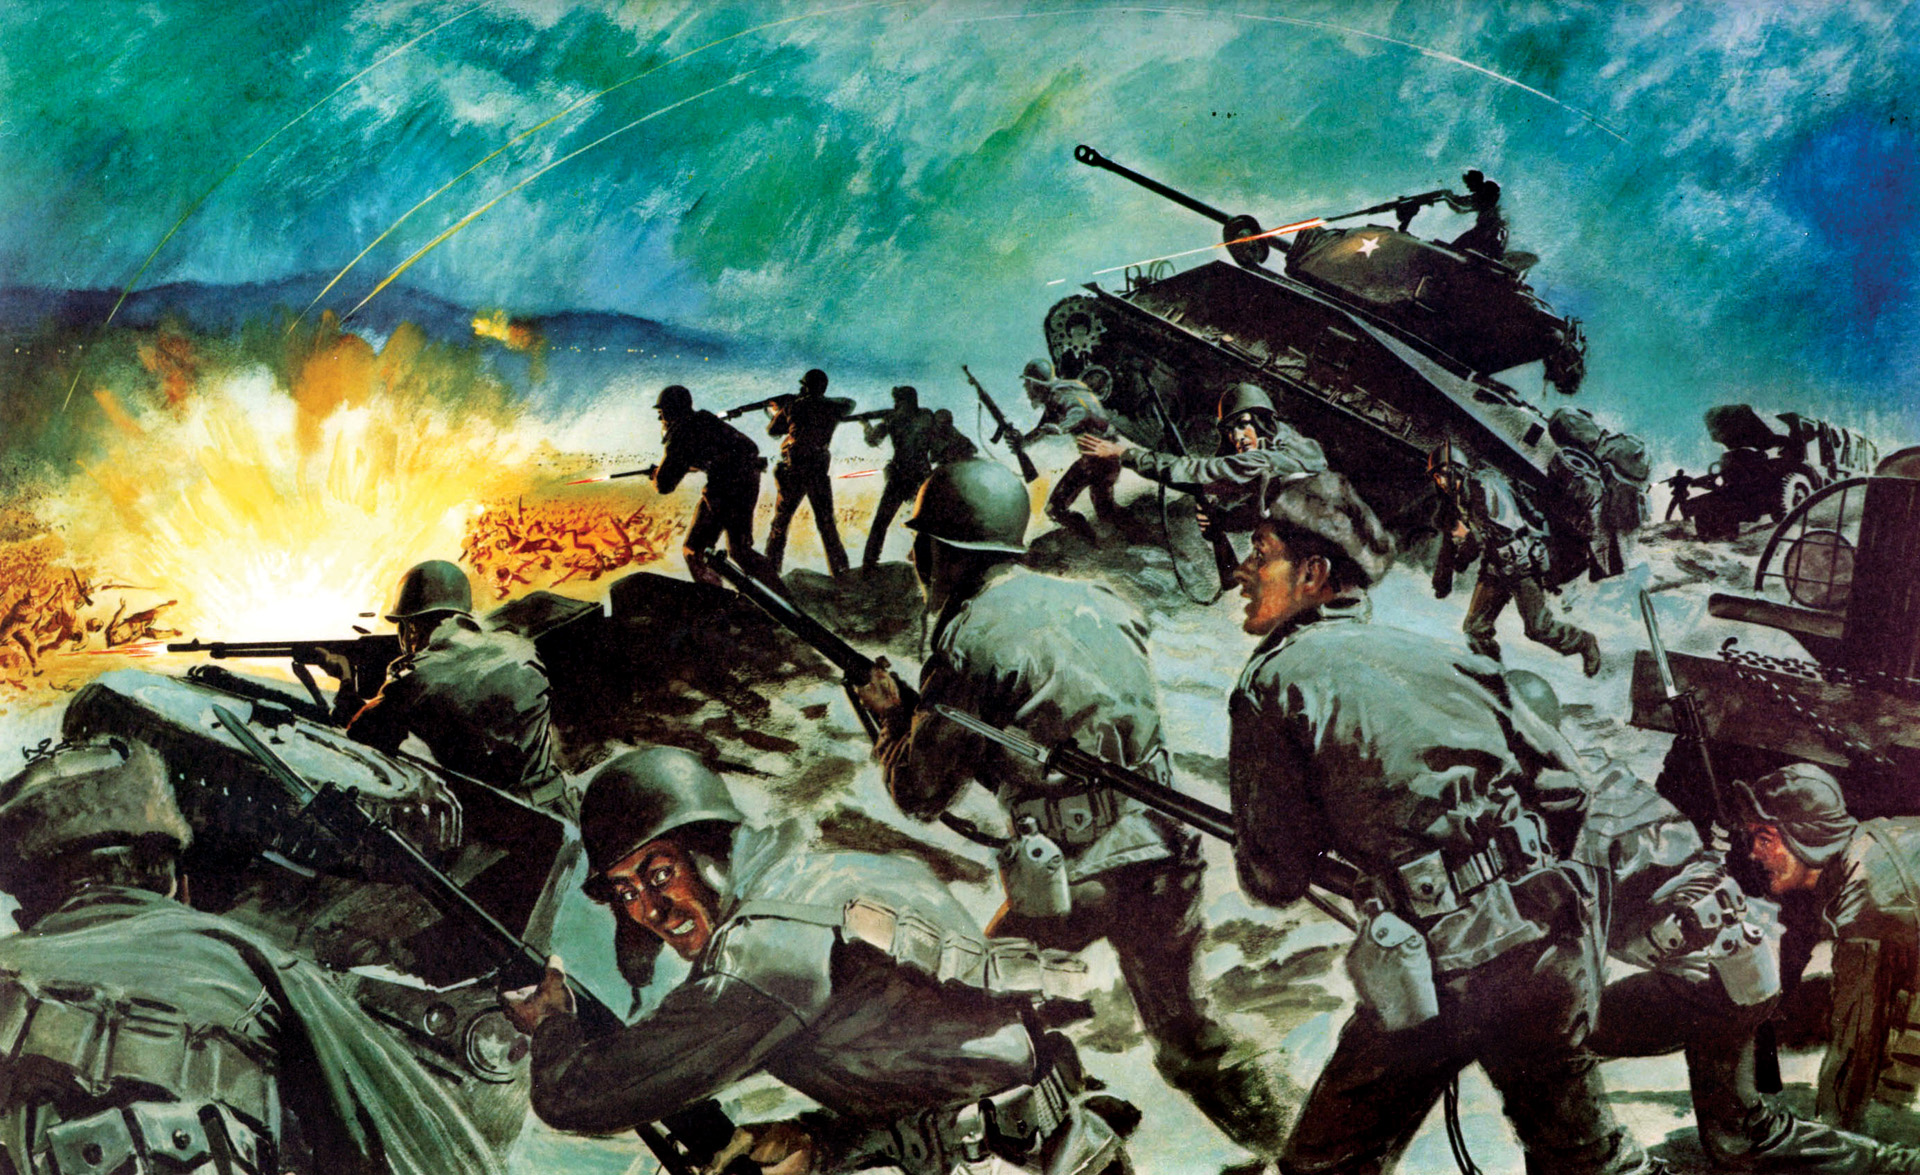 U.S. troops fire on Chinese during Battle of Chipyong-Ni, which marked the high tide of the Chinese counteroffensive in the Korean War. The Chinese attacked at night to take full advantage of their superb infiltration tactics.